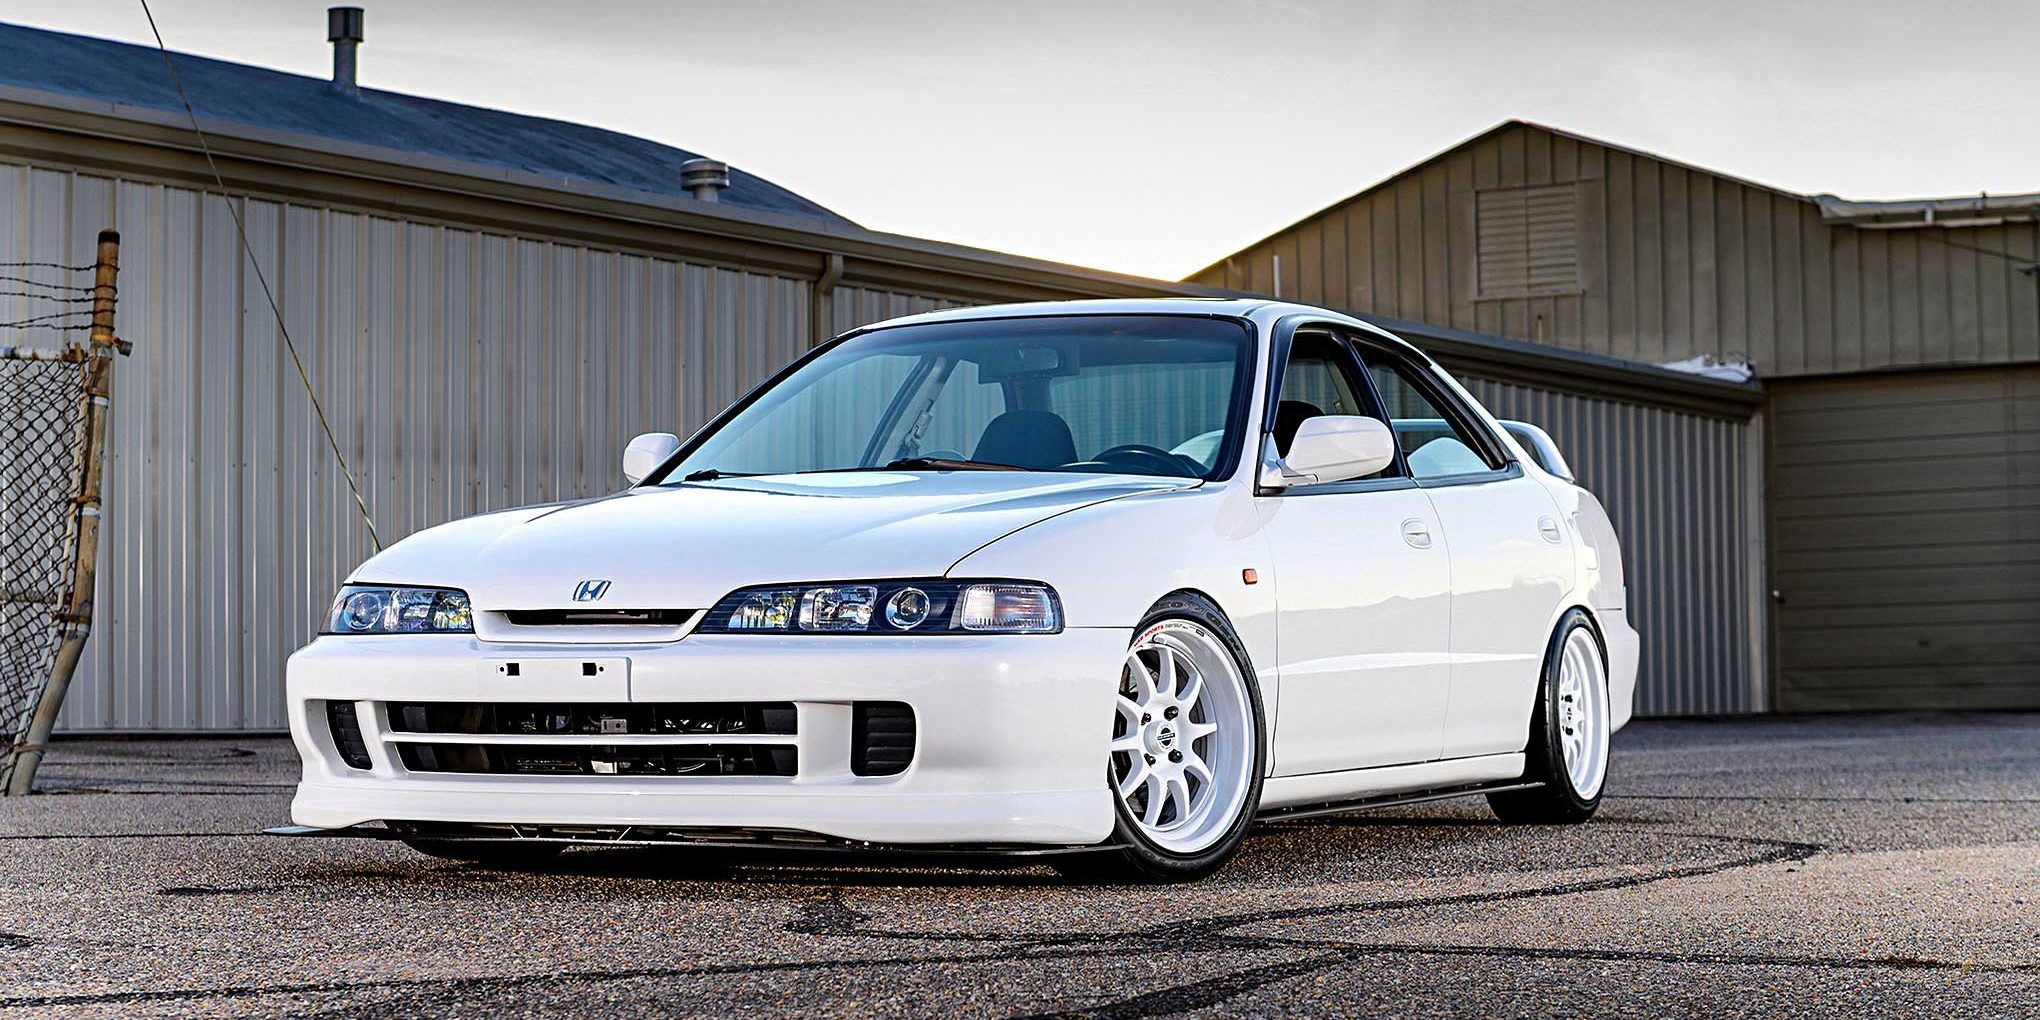 This Period Correct Acura Integra Gs R Is Timeless And More Performance Motor Oil Transmission Fluid Eneos